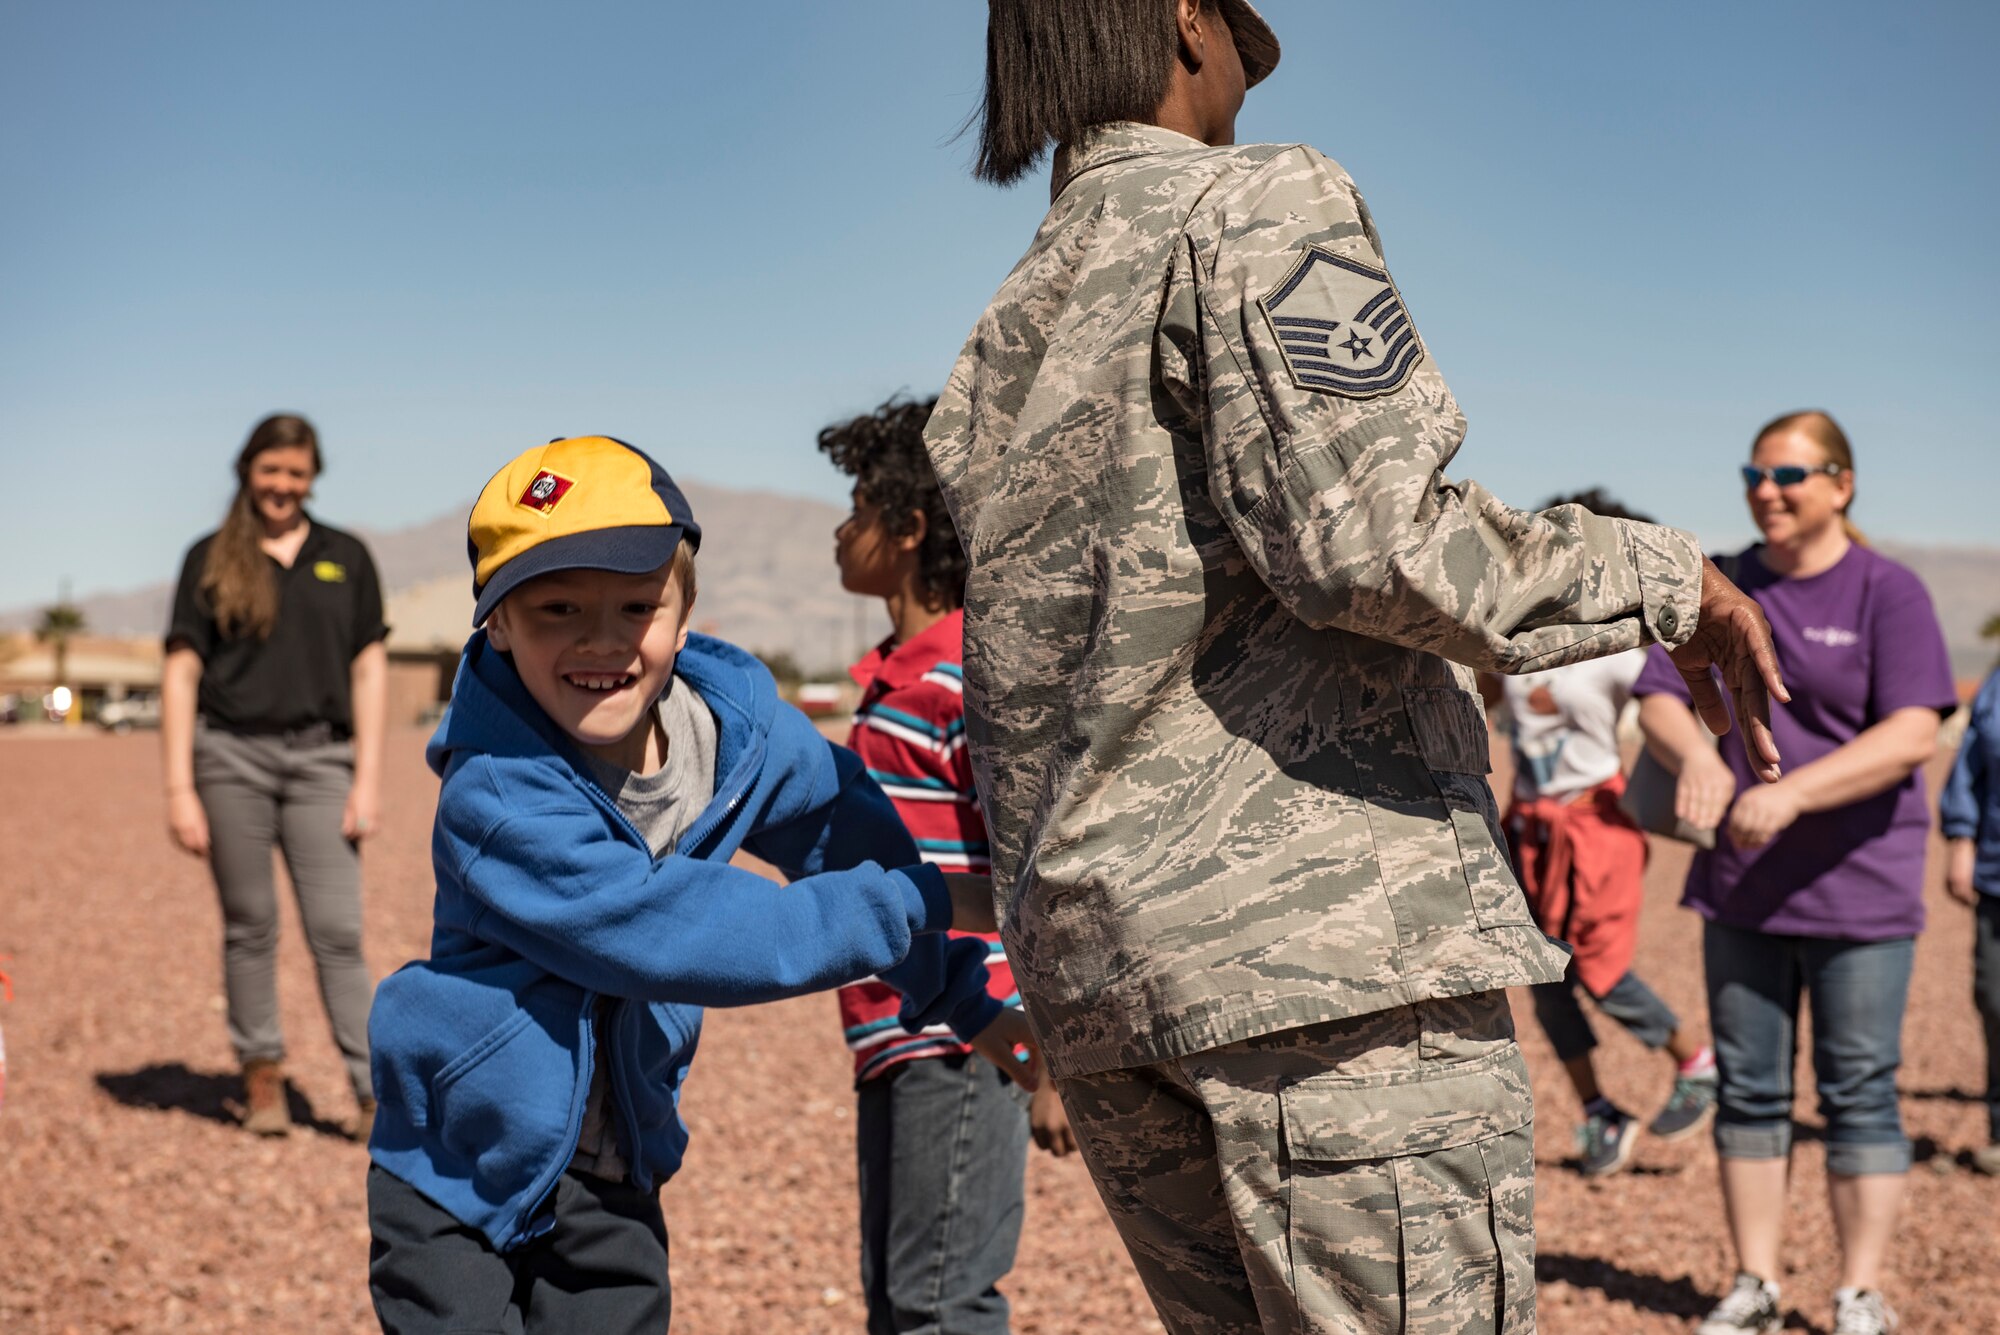 A child tags an Airman during a Leave No Trace workshop at Nellis Air Force Base, Nevada, March 28, 2018. The game simulated how invasive species can have a negative impact on the environment. (U.S. Air Force photo by Airman 1st Class Andrew D. Sarver)